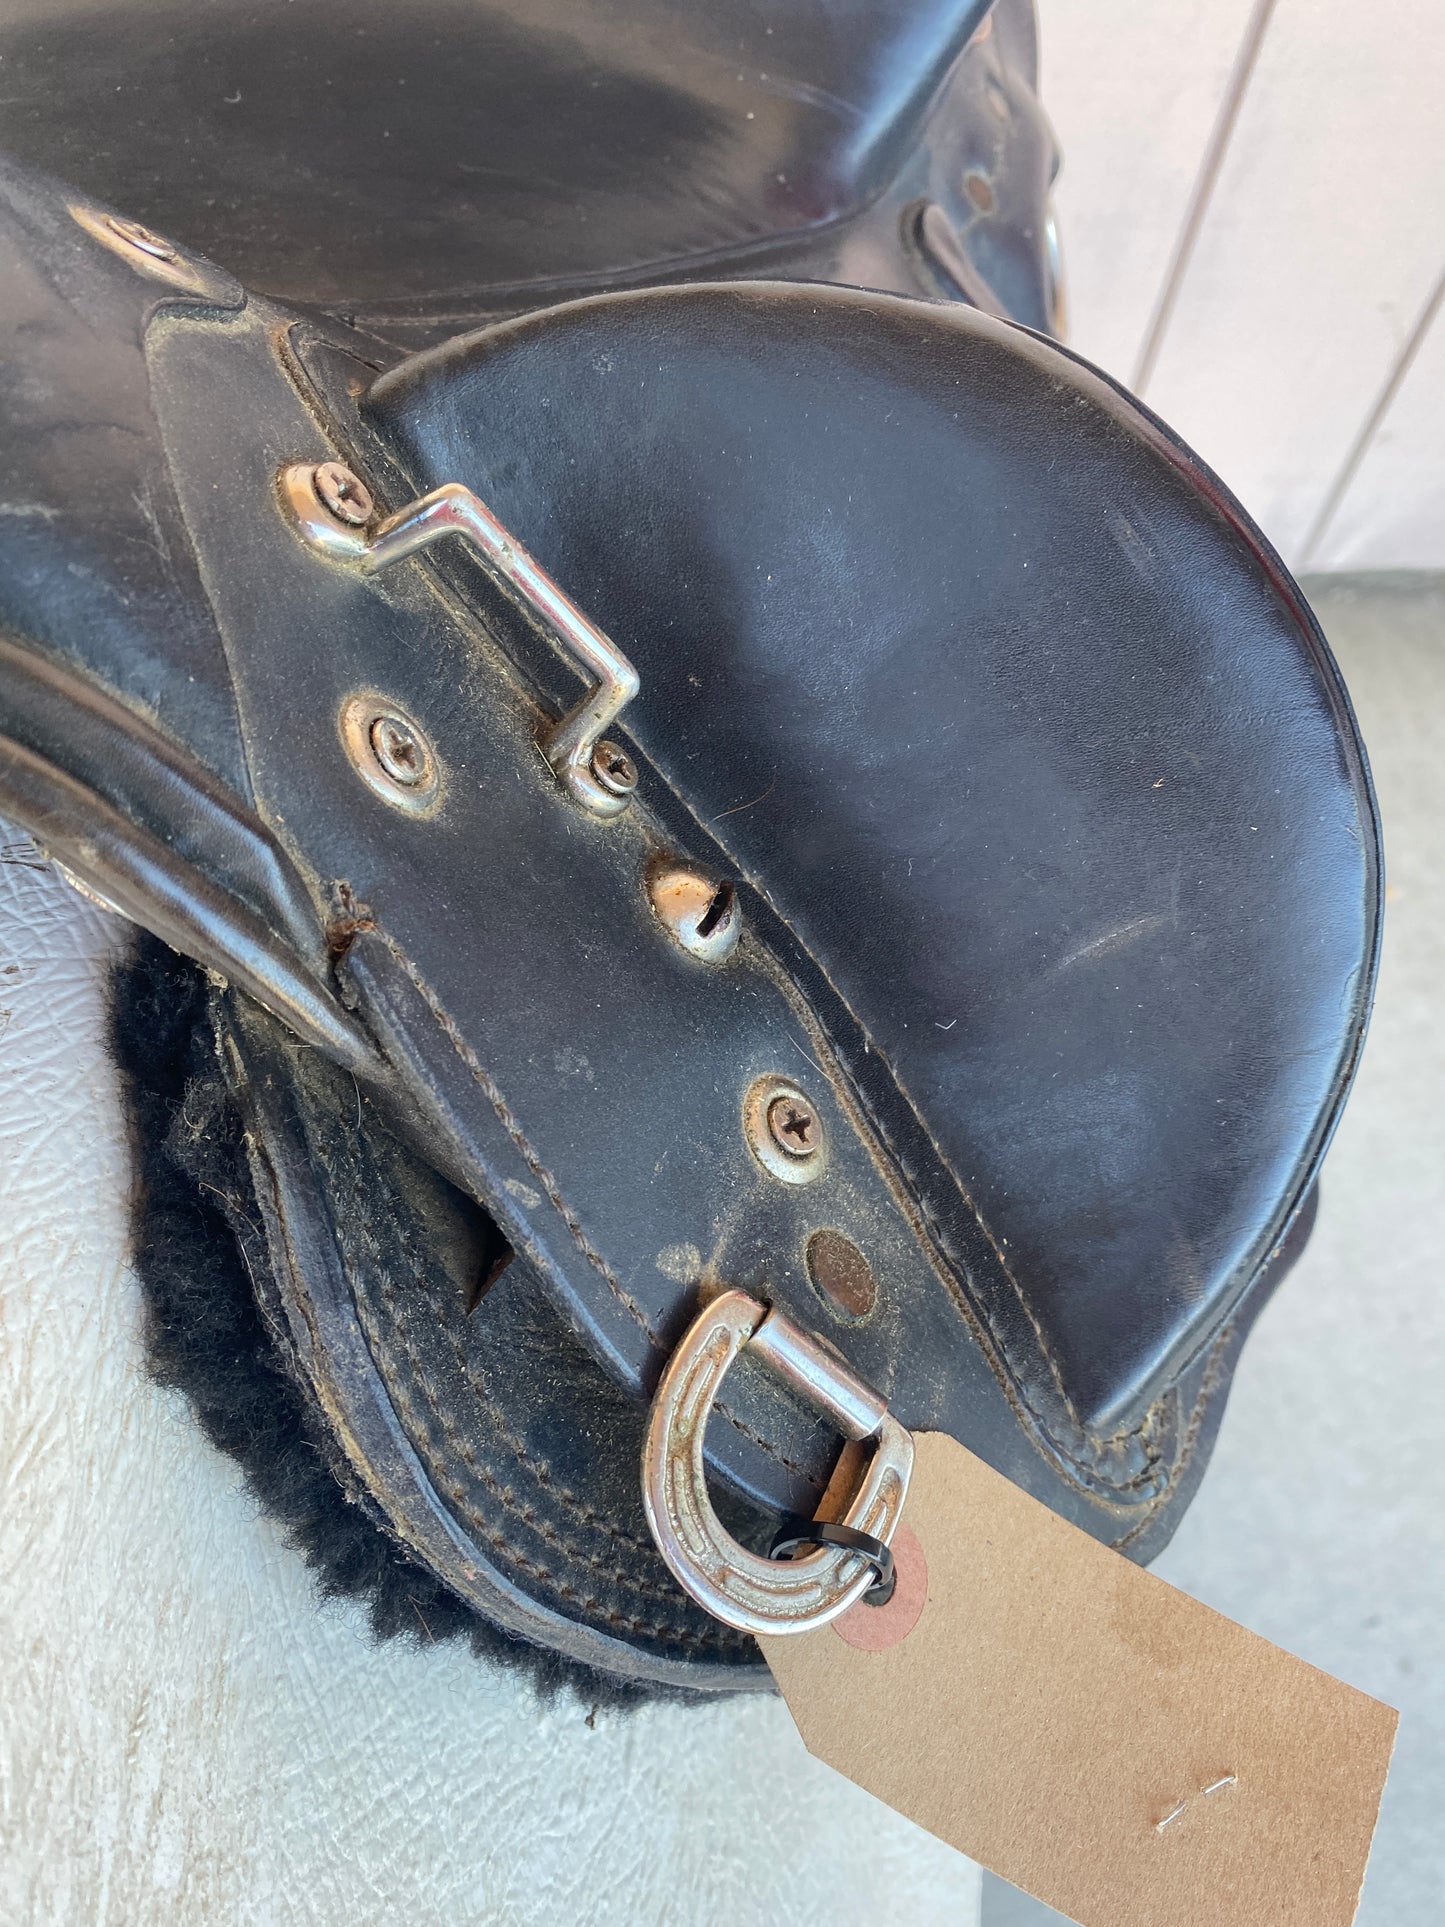 15” MusterMaster Black Australian Stock Saddle with Horn